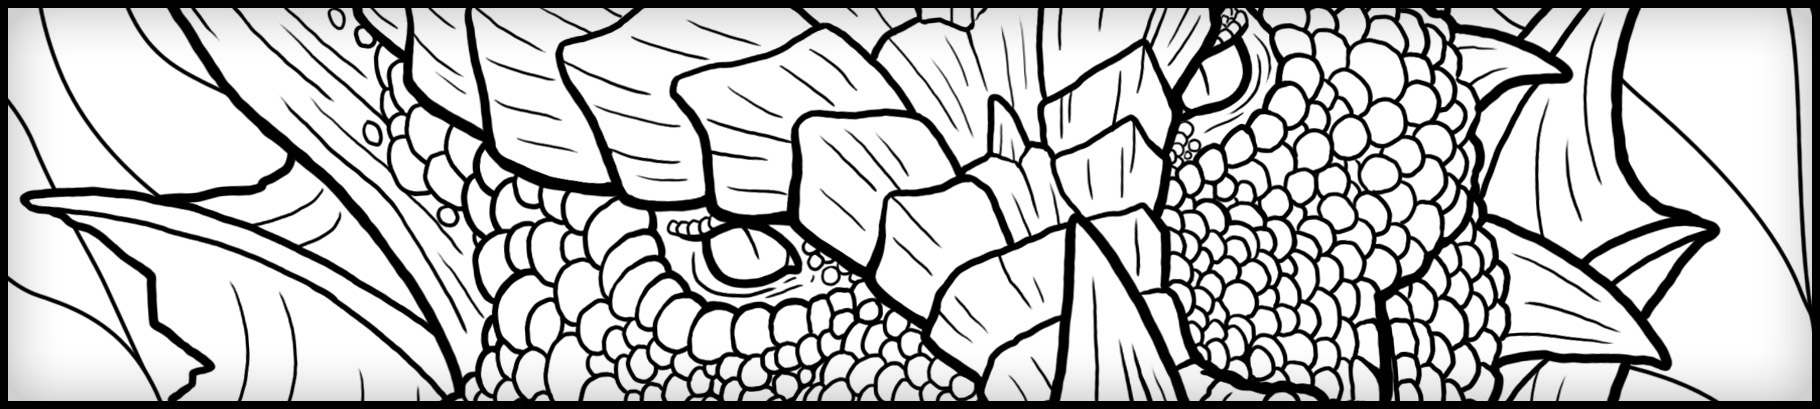 Free Coloring Pages | Artwork | Red Nebula Studios